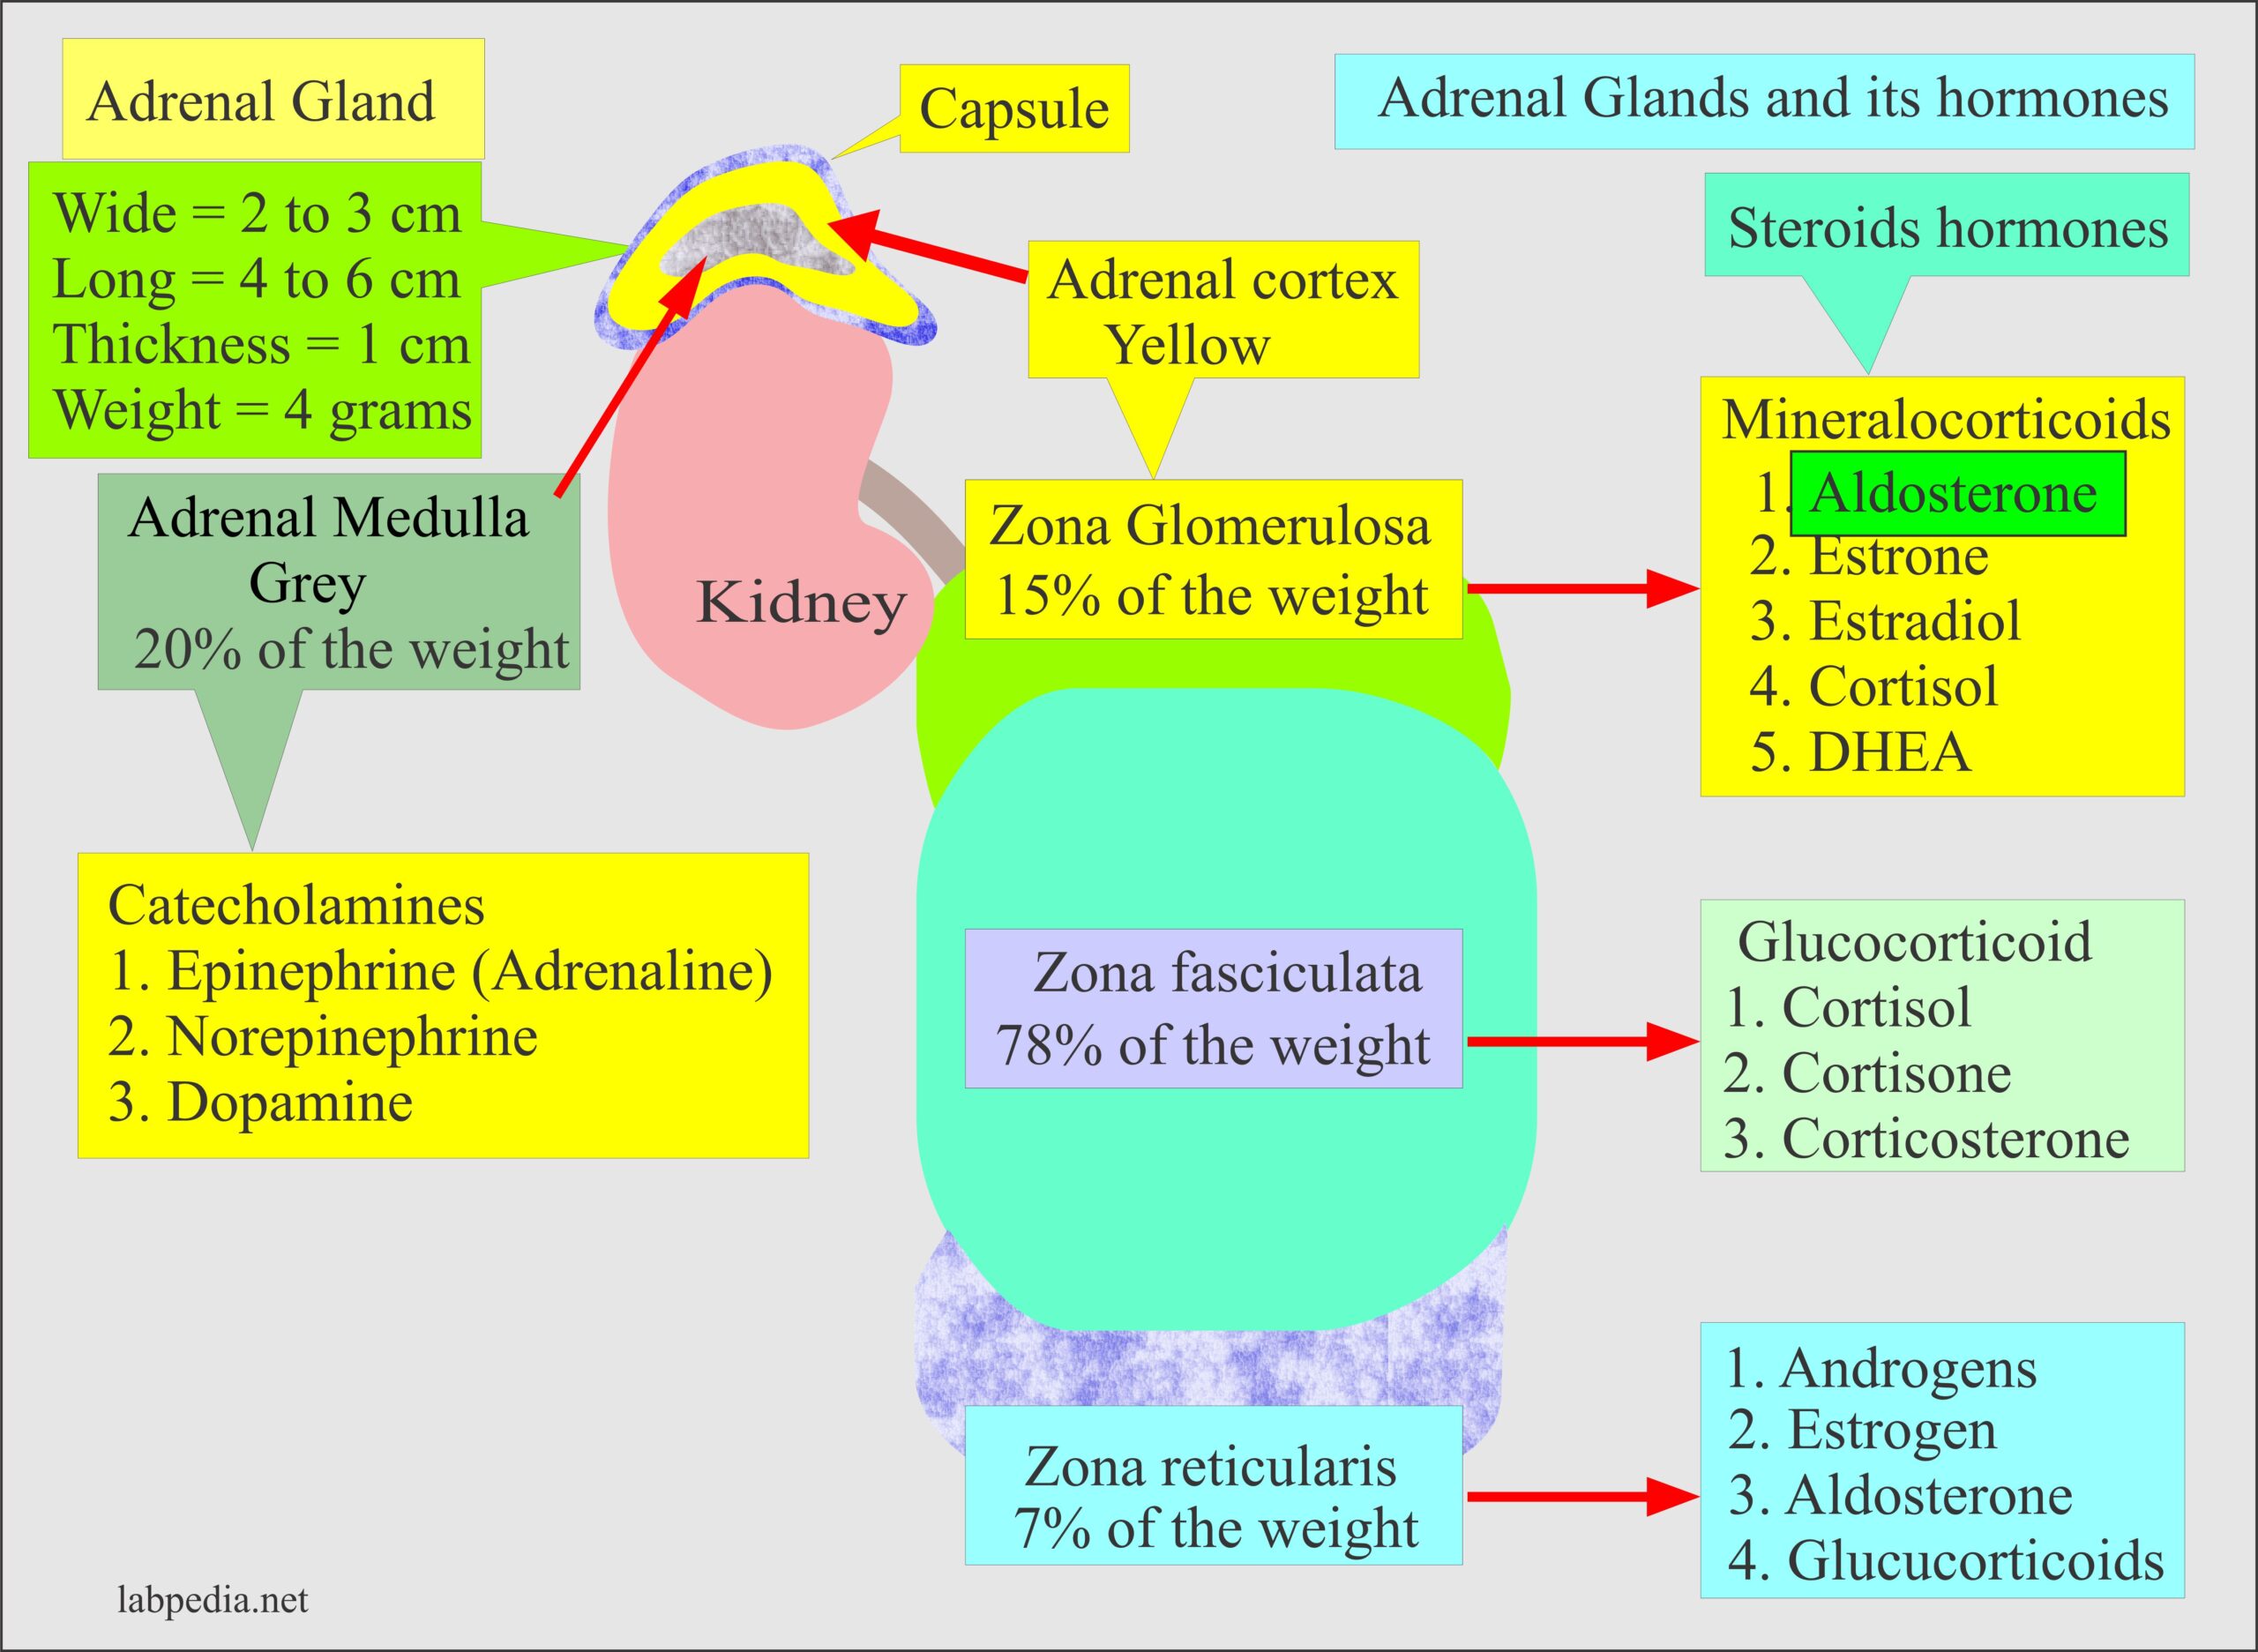 Aldosterone secreted by the Adrenal glands from the zona glomerulosa